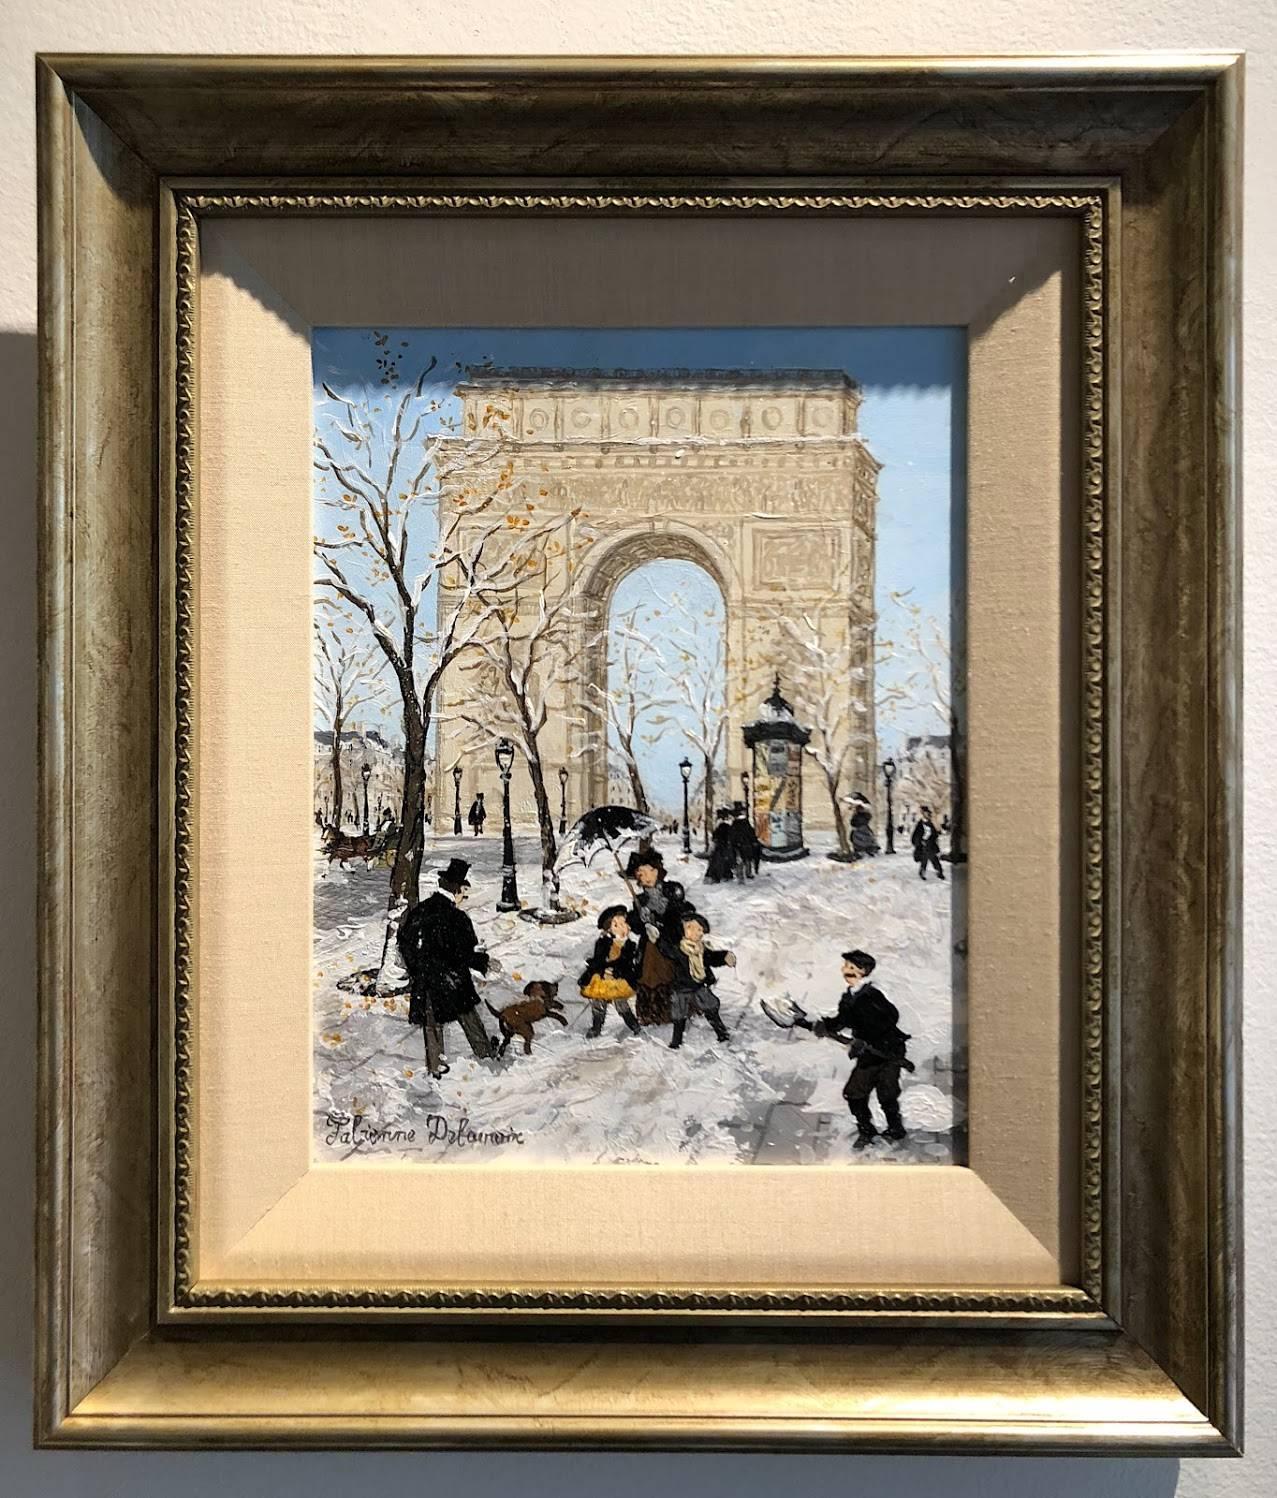 This charming acrylic painting depicts Parisian lifestyle as families walk through the snow-covered city streets with the Champs Elysees in the background. The painting uses bright blues and whites to depict the fresh winter air.

Fabienne Delacroix